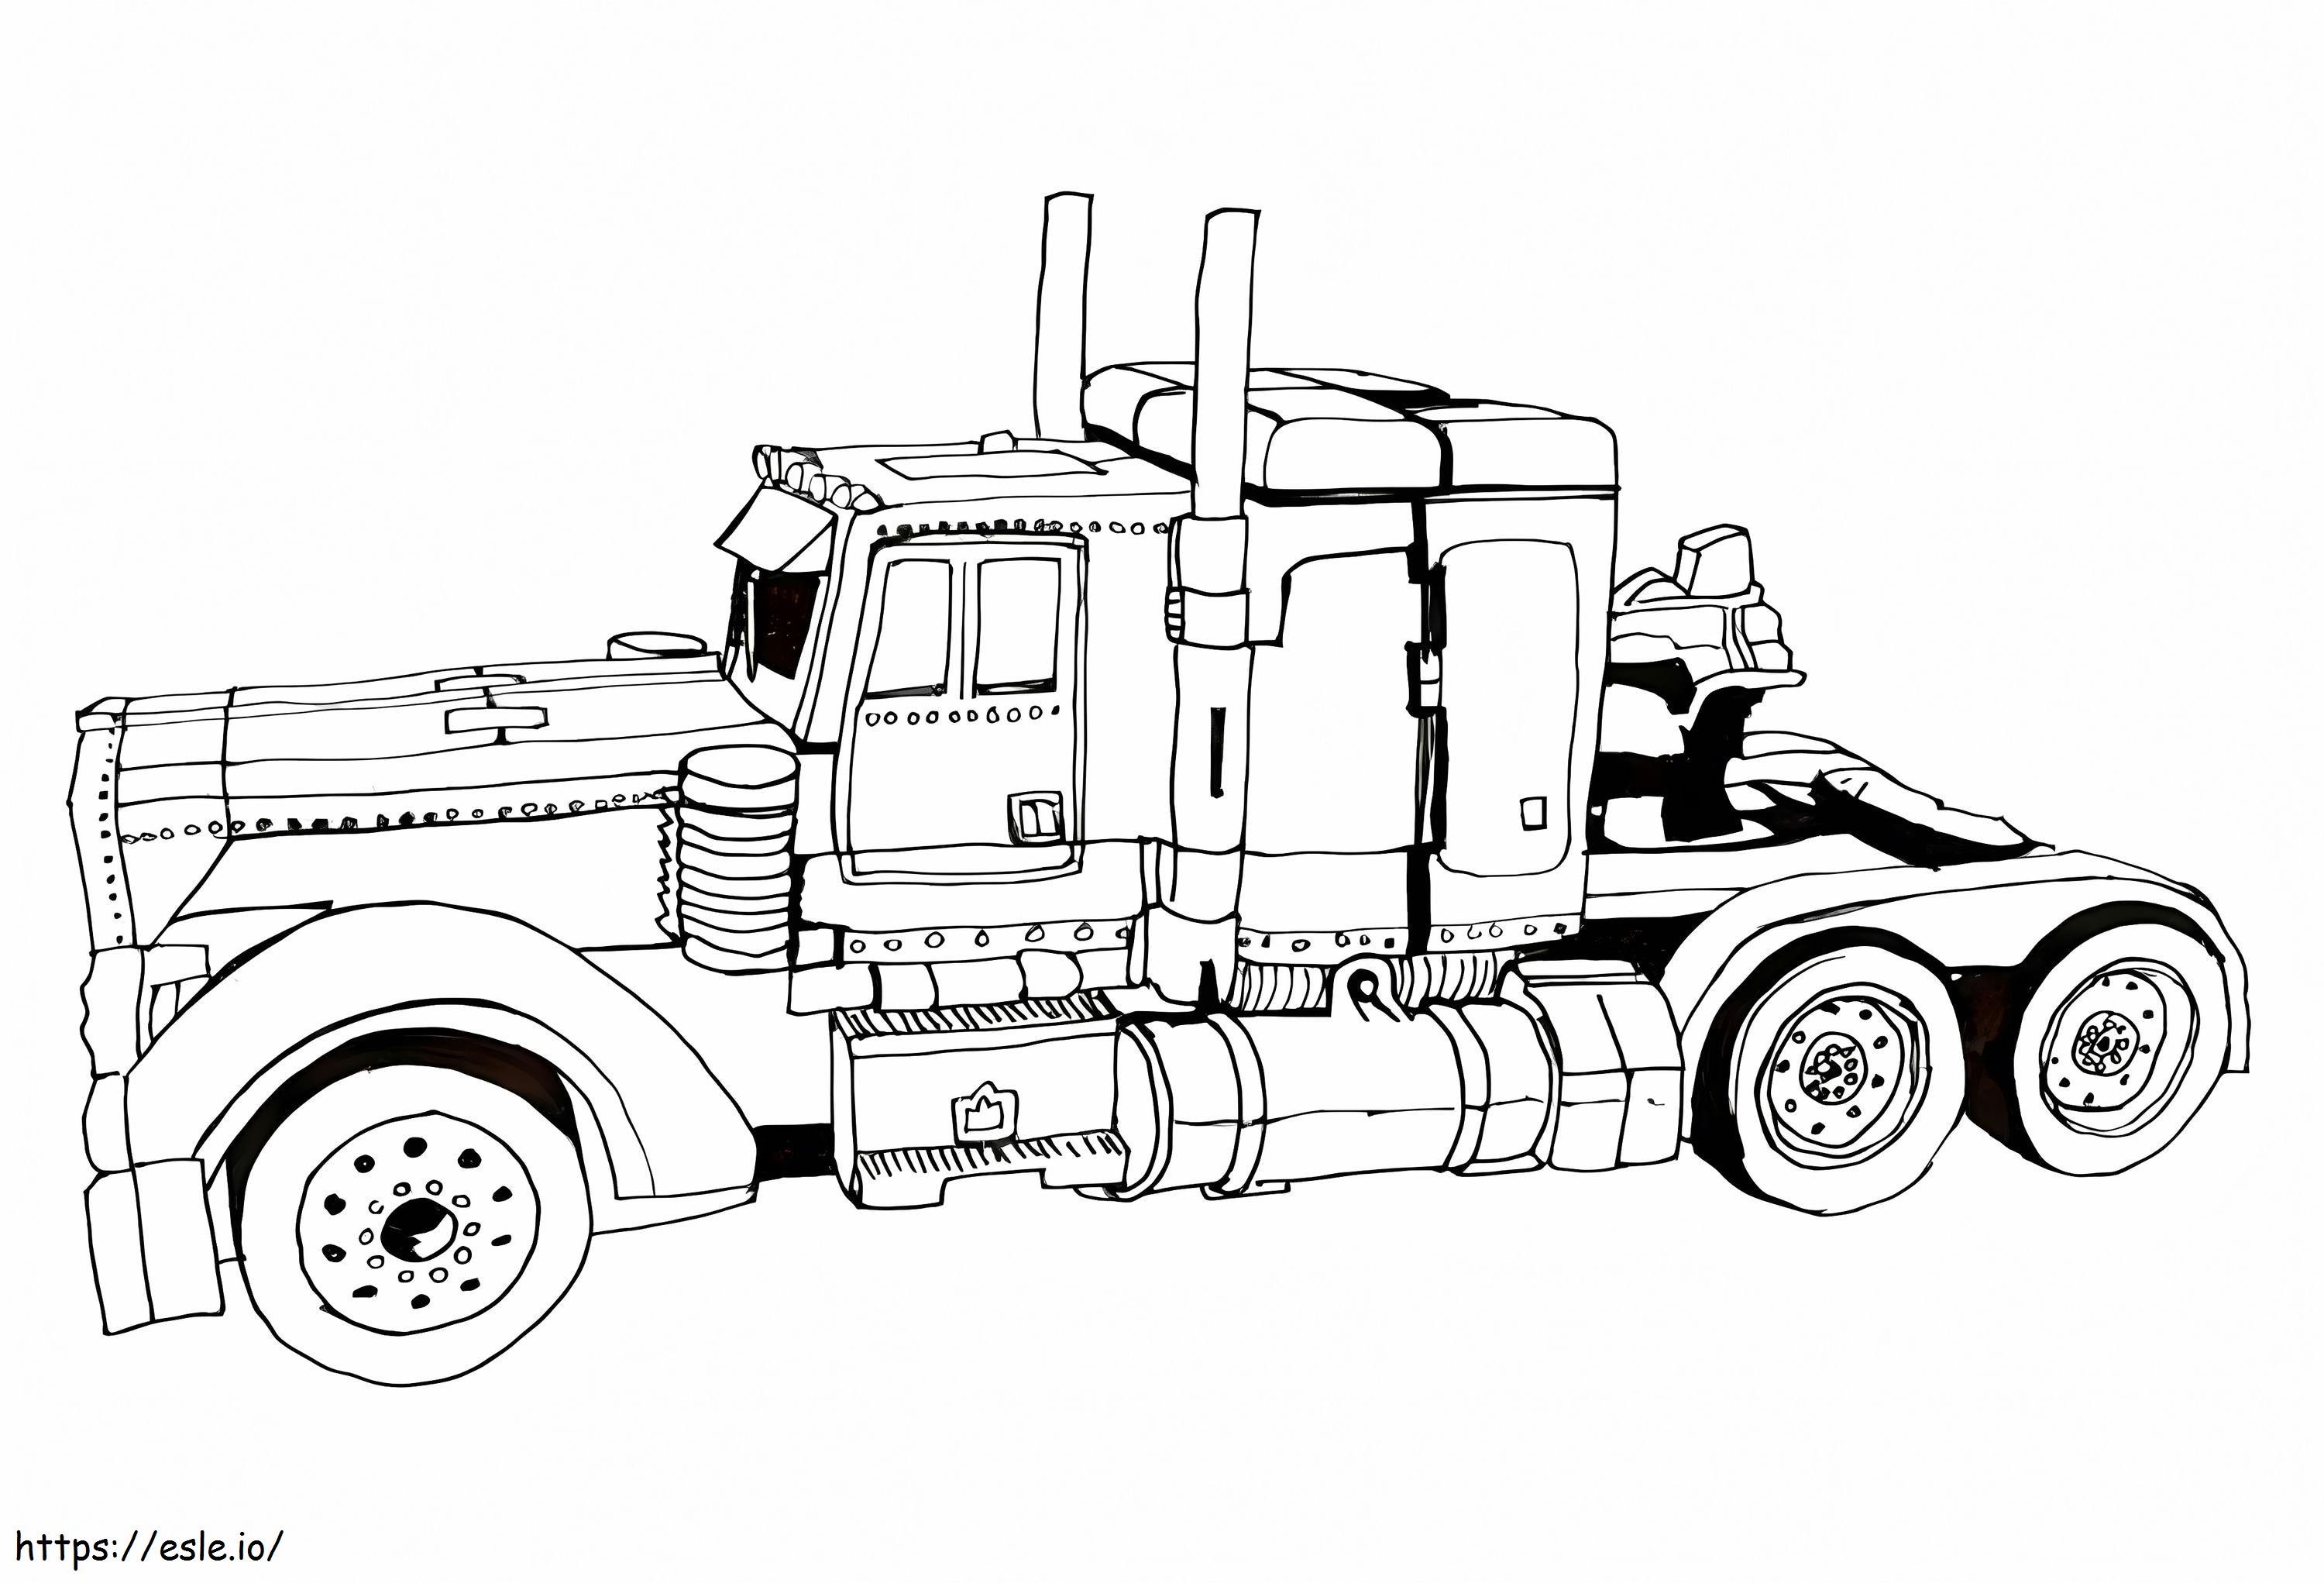 Optimus prime truck coloring page